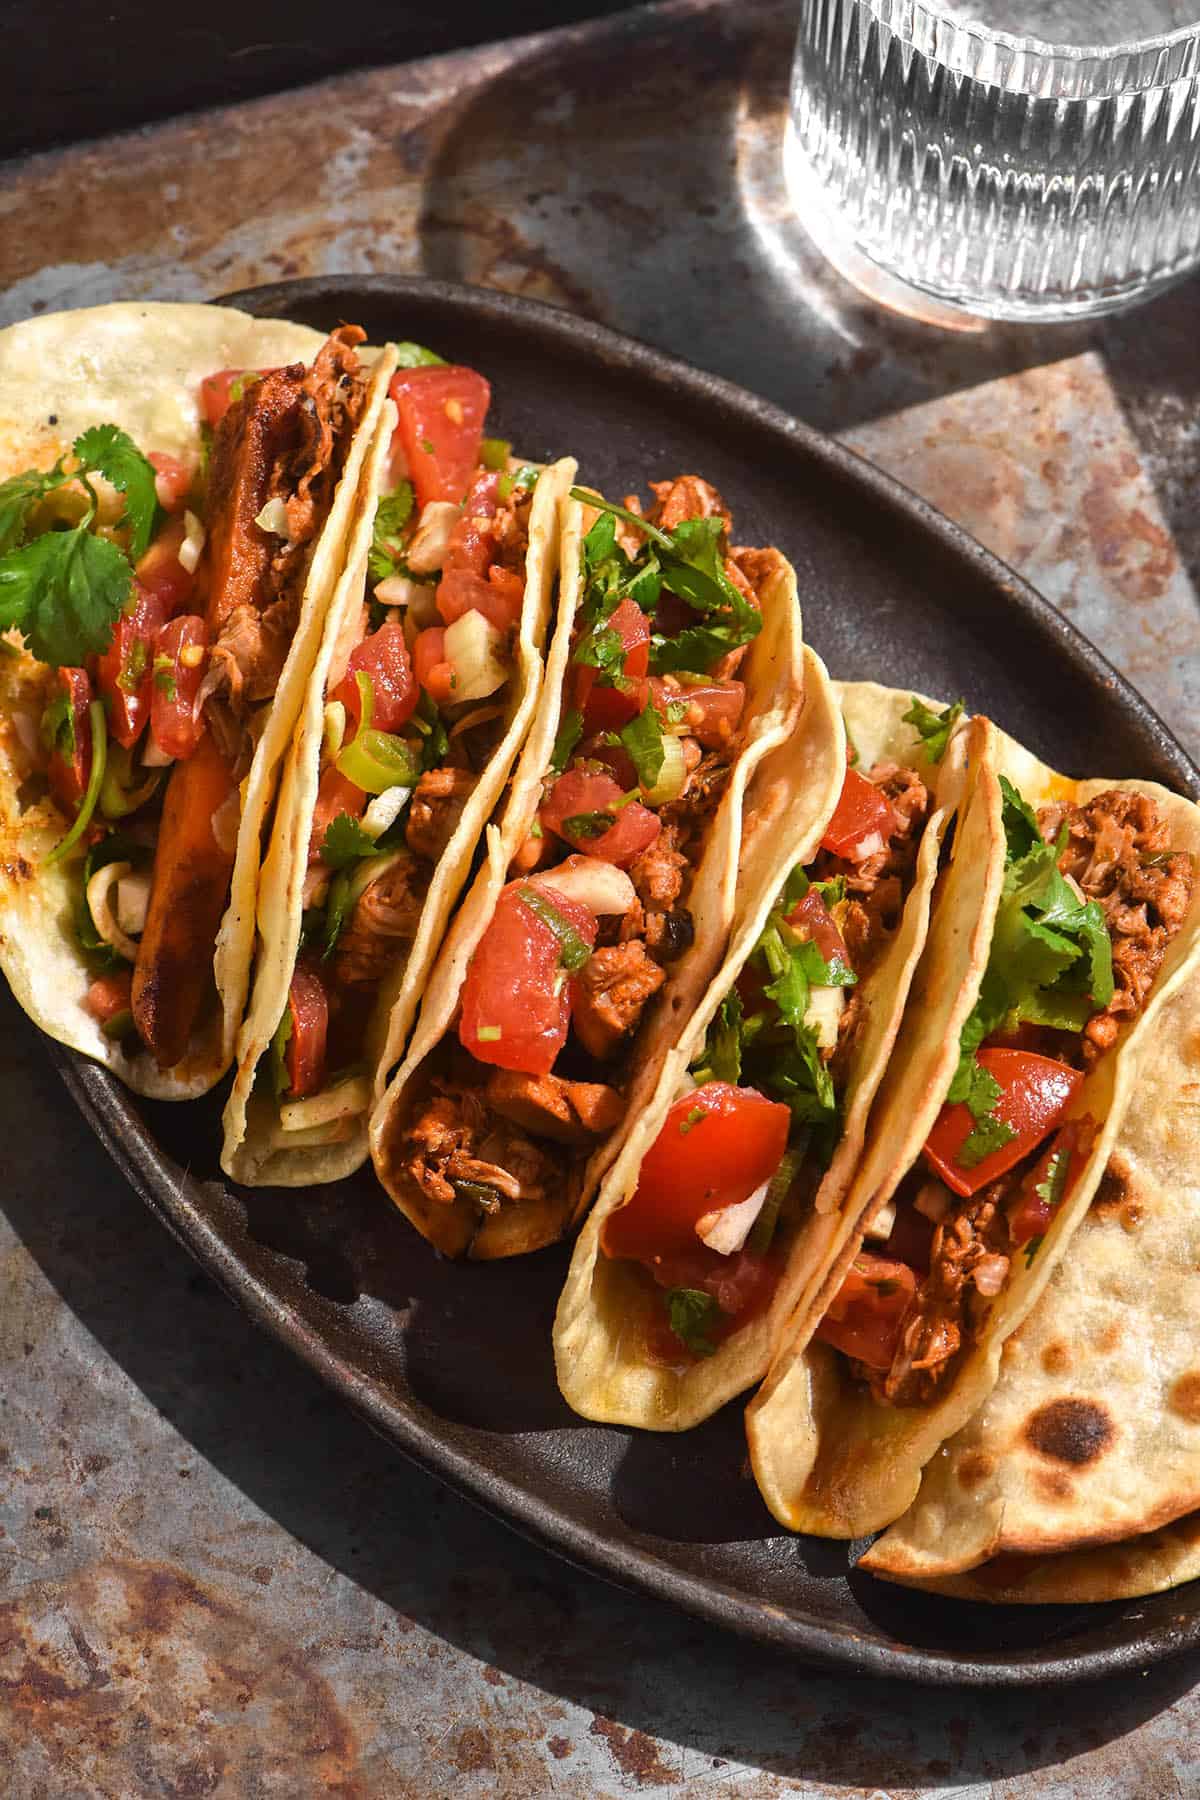 A side on image of low FODMAP tacos filled with pico de gallo on a steel sizzler platter against a steel backdrop. A glass of water sits in the background.